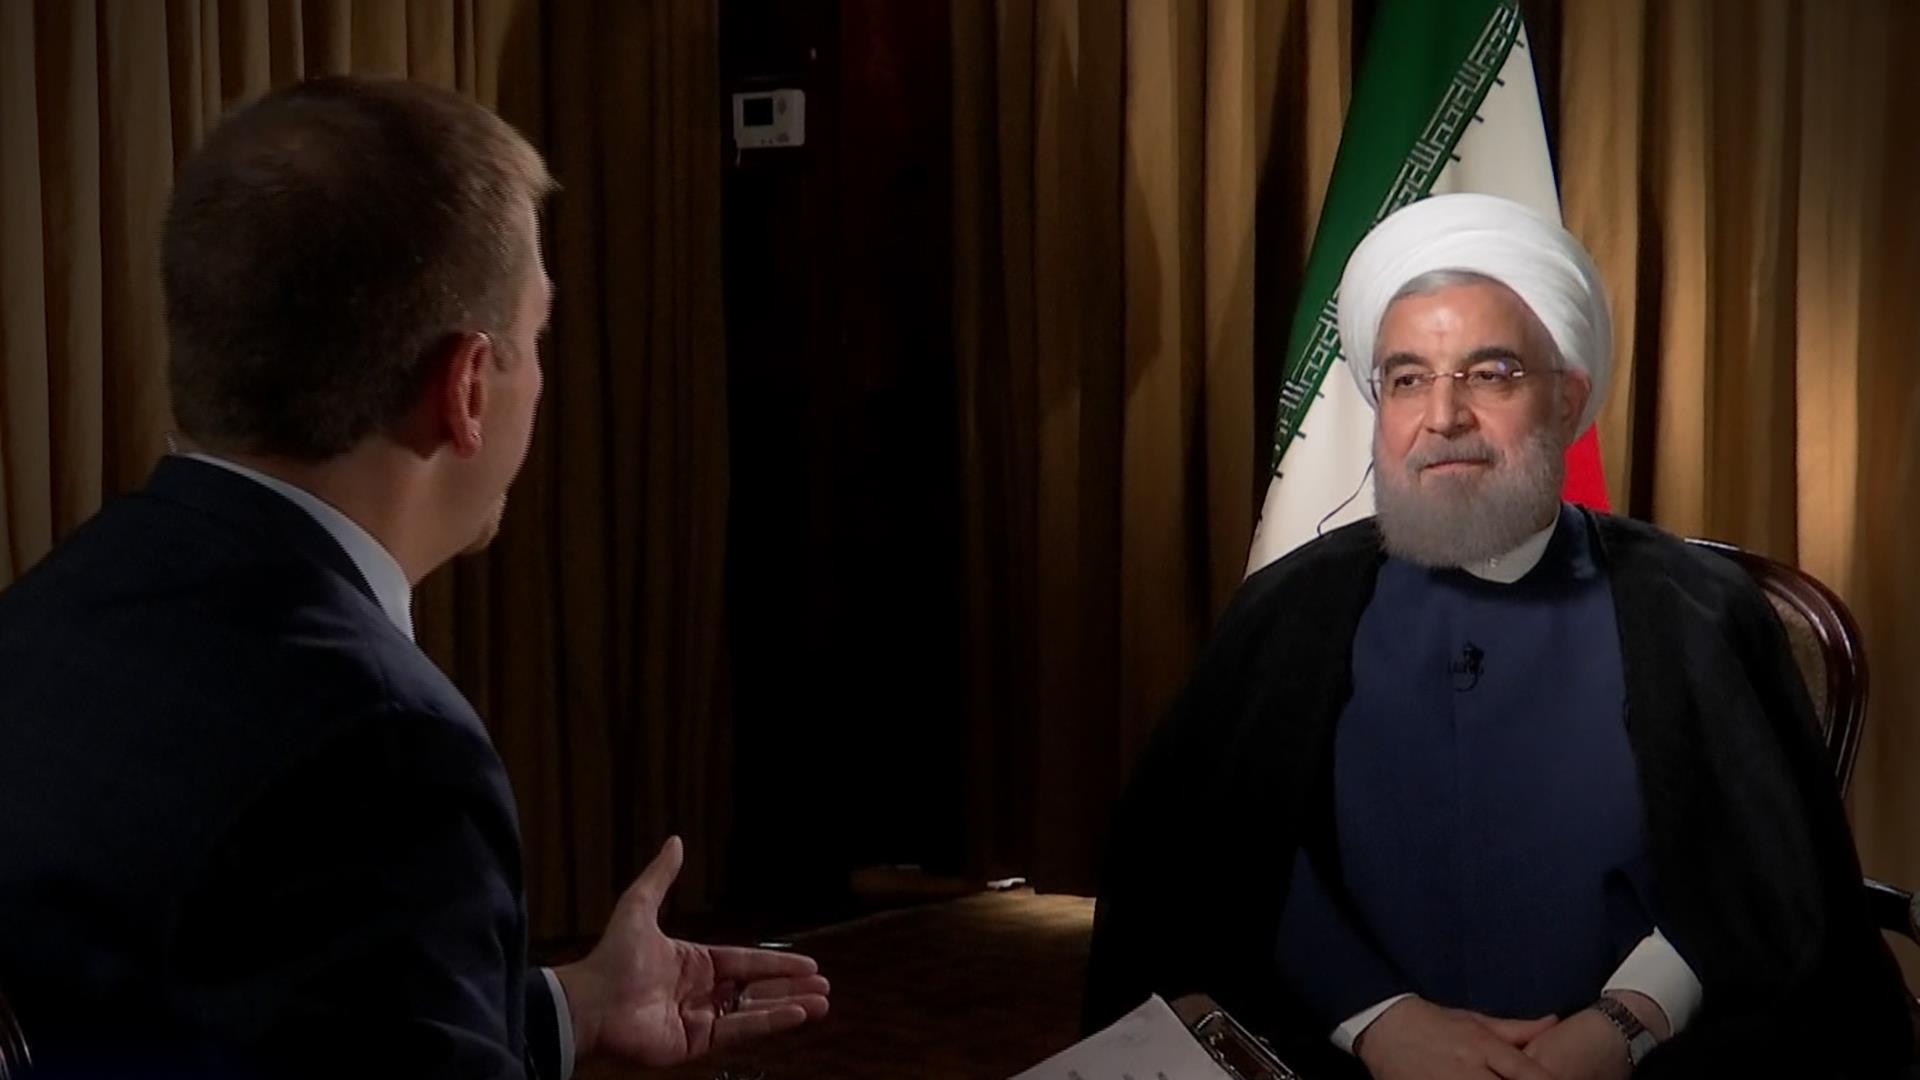 Full Interview: Chuck Todd's Exclusive With Iranian President Rouhani